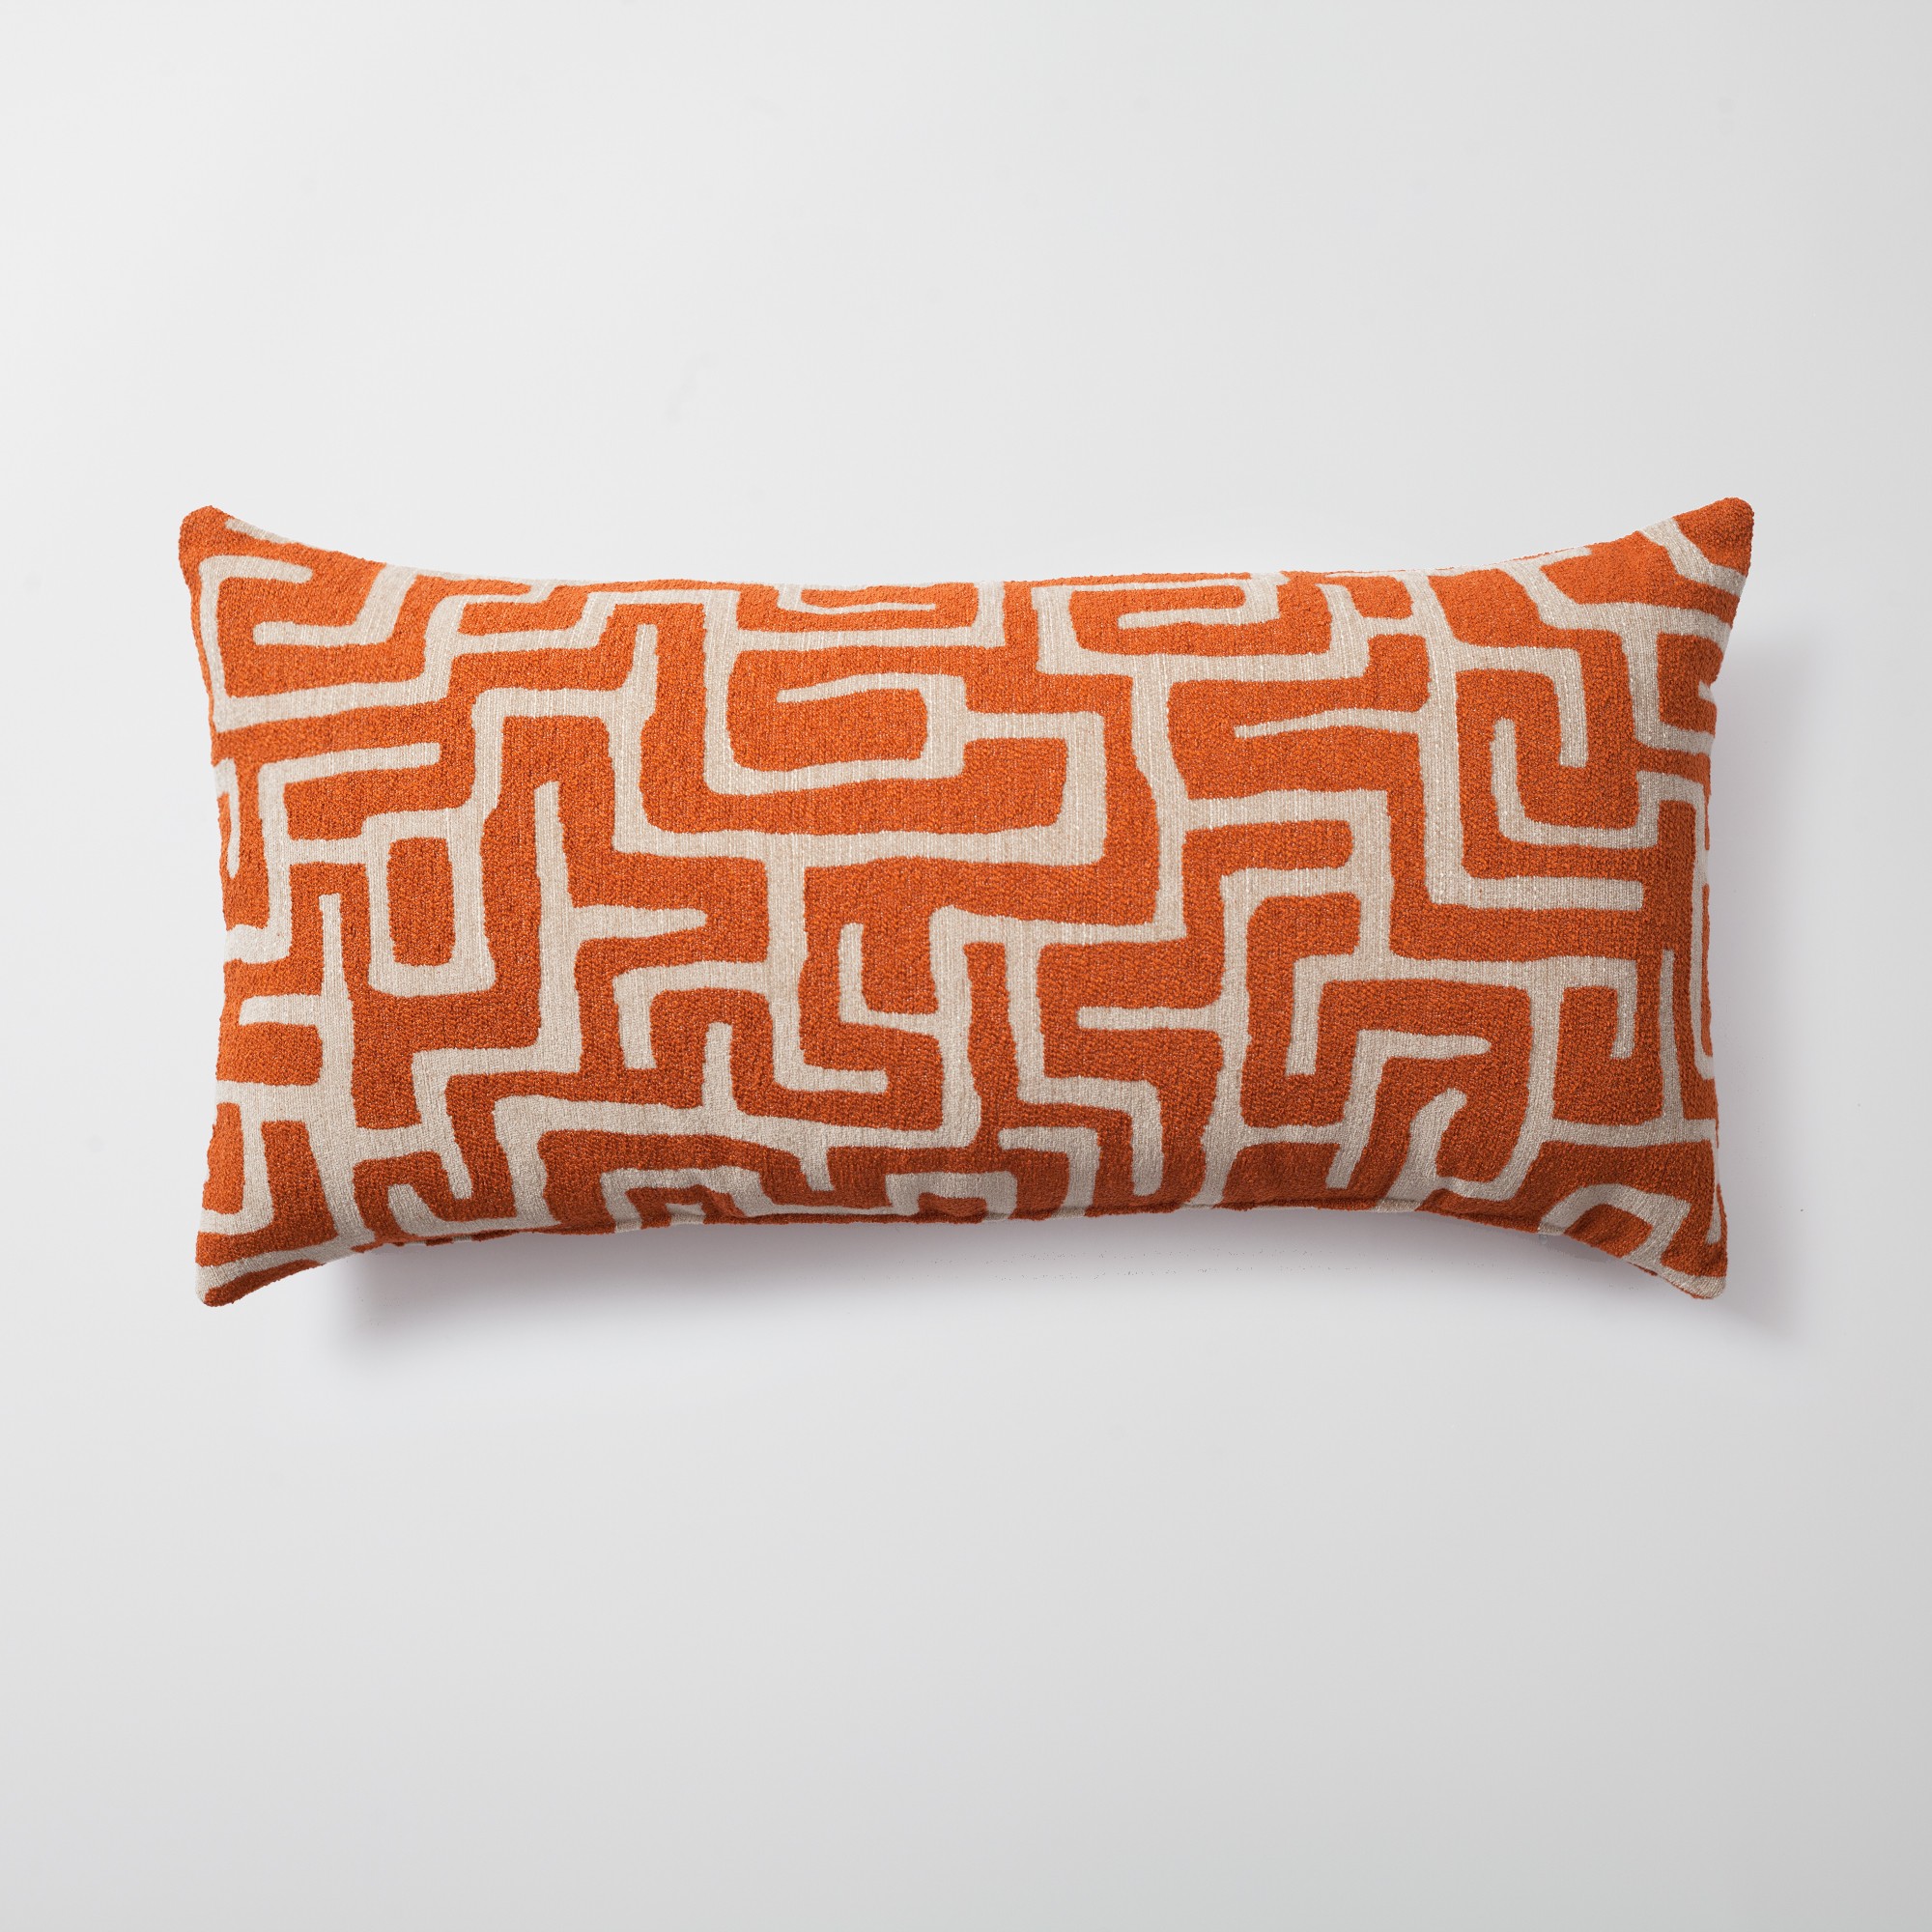 "Norm" - Maze Patterned 14x28 Inch Pillow - Orange (Cover Only)